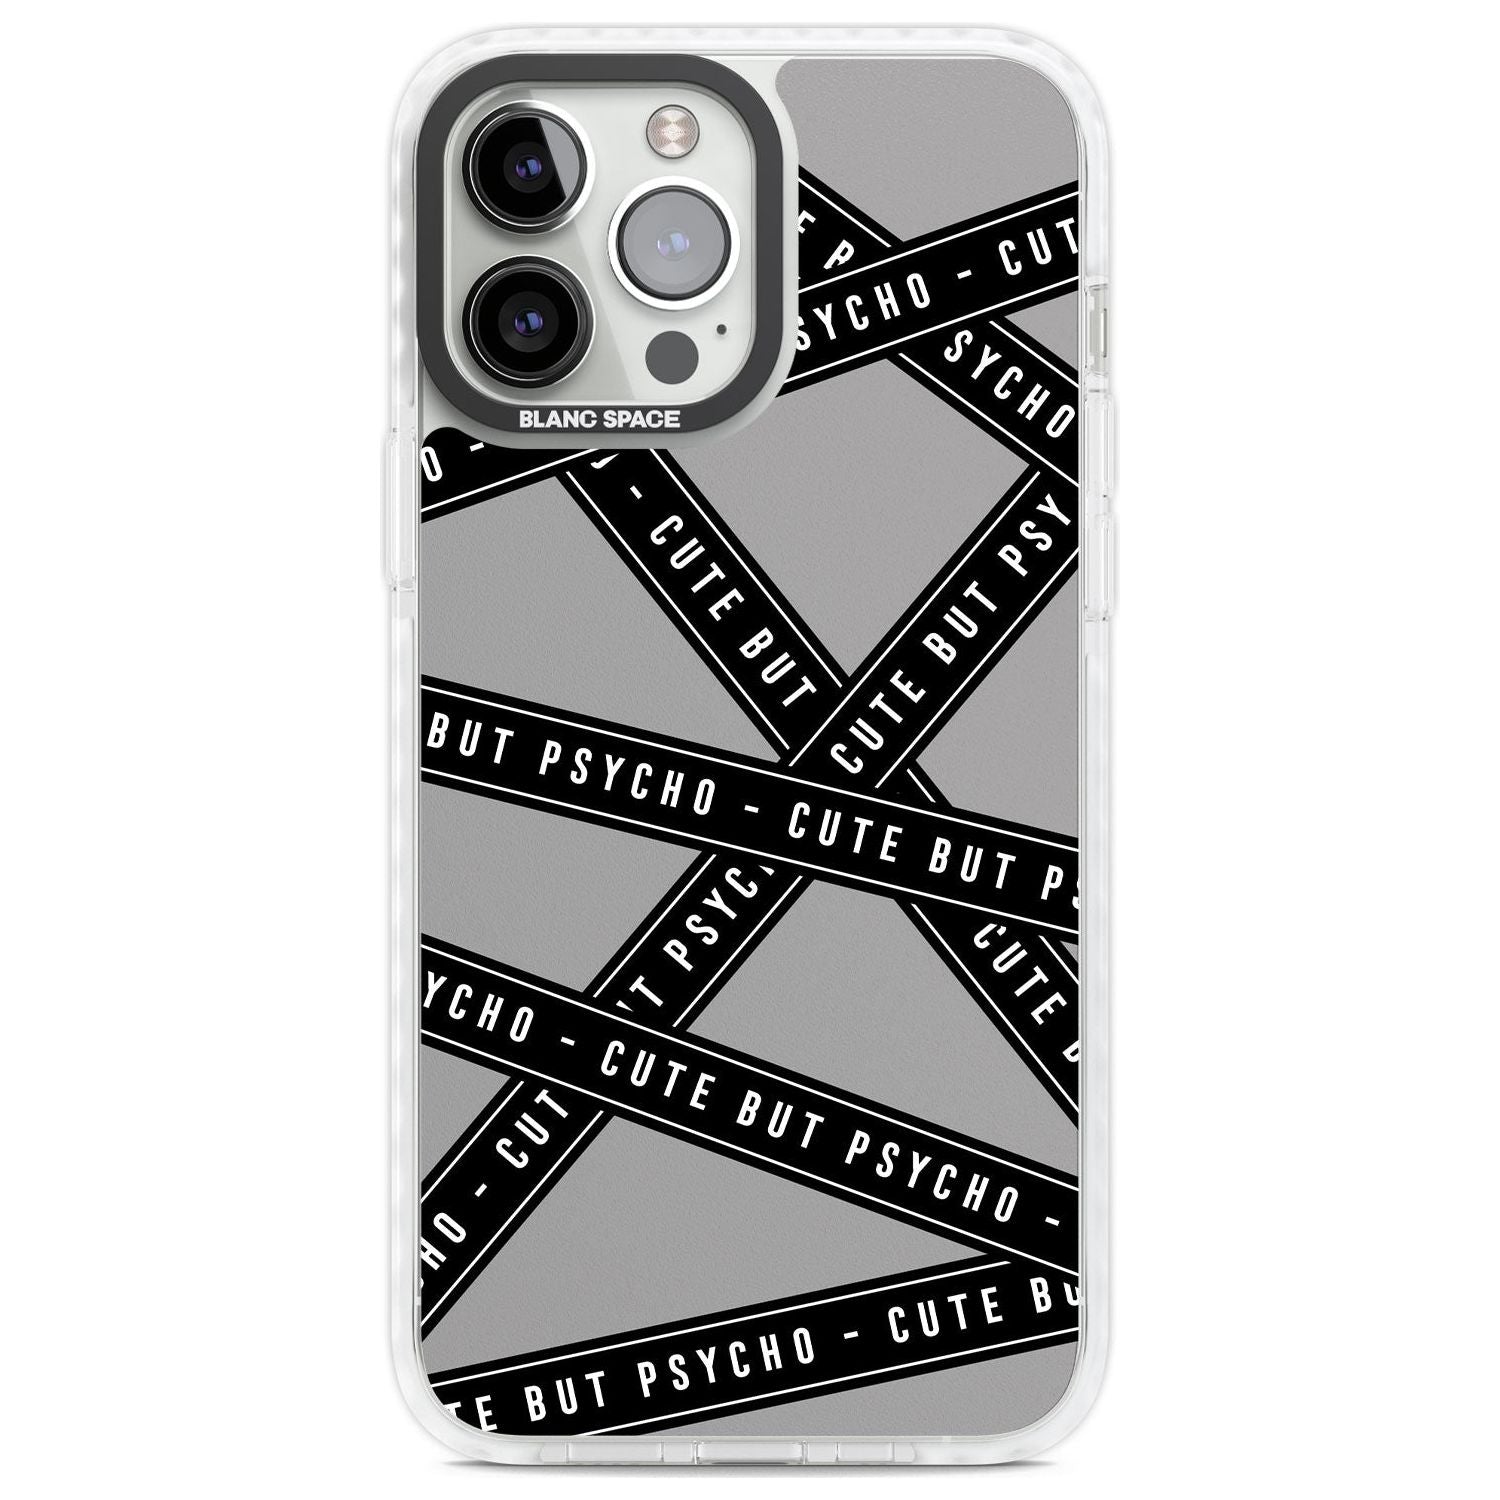 Caution Tape Phrases Cute But Psycho Phone Case iPhone 13 Pro Max / Impact Case,iPhone 14 Pro Max / Impact Case Blanc Space